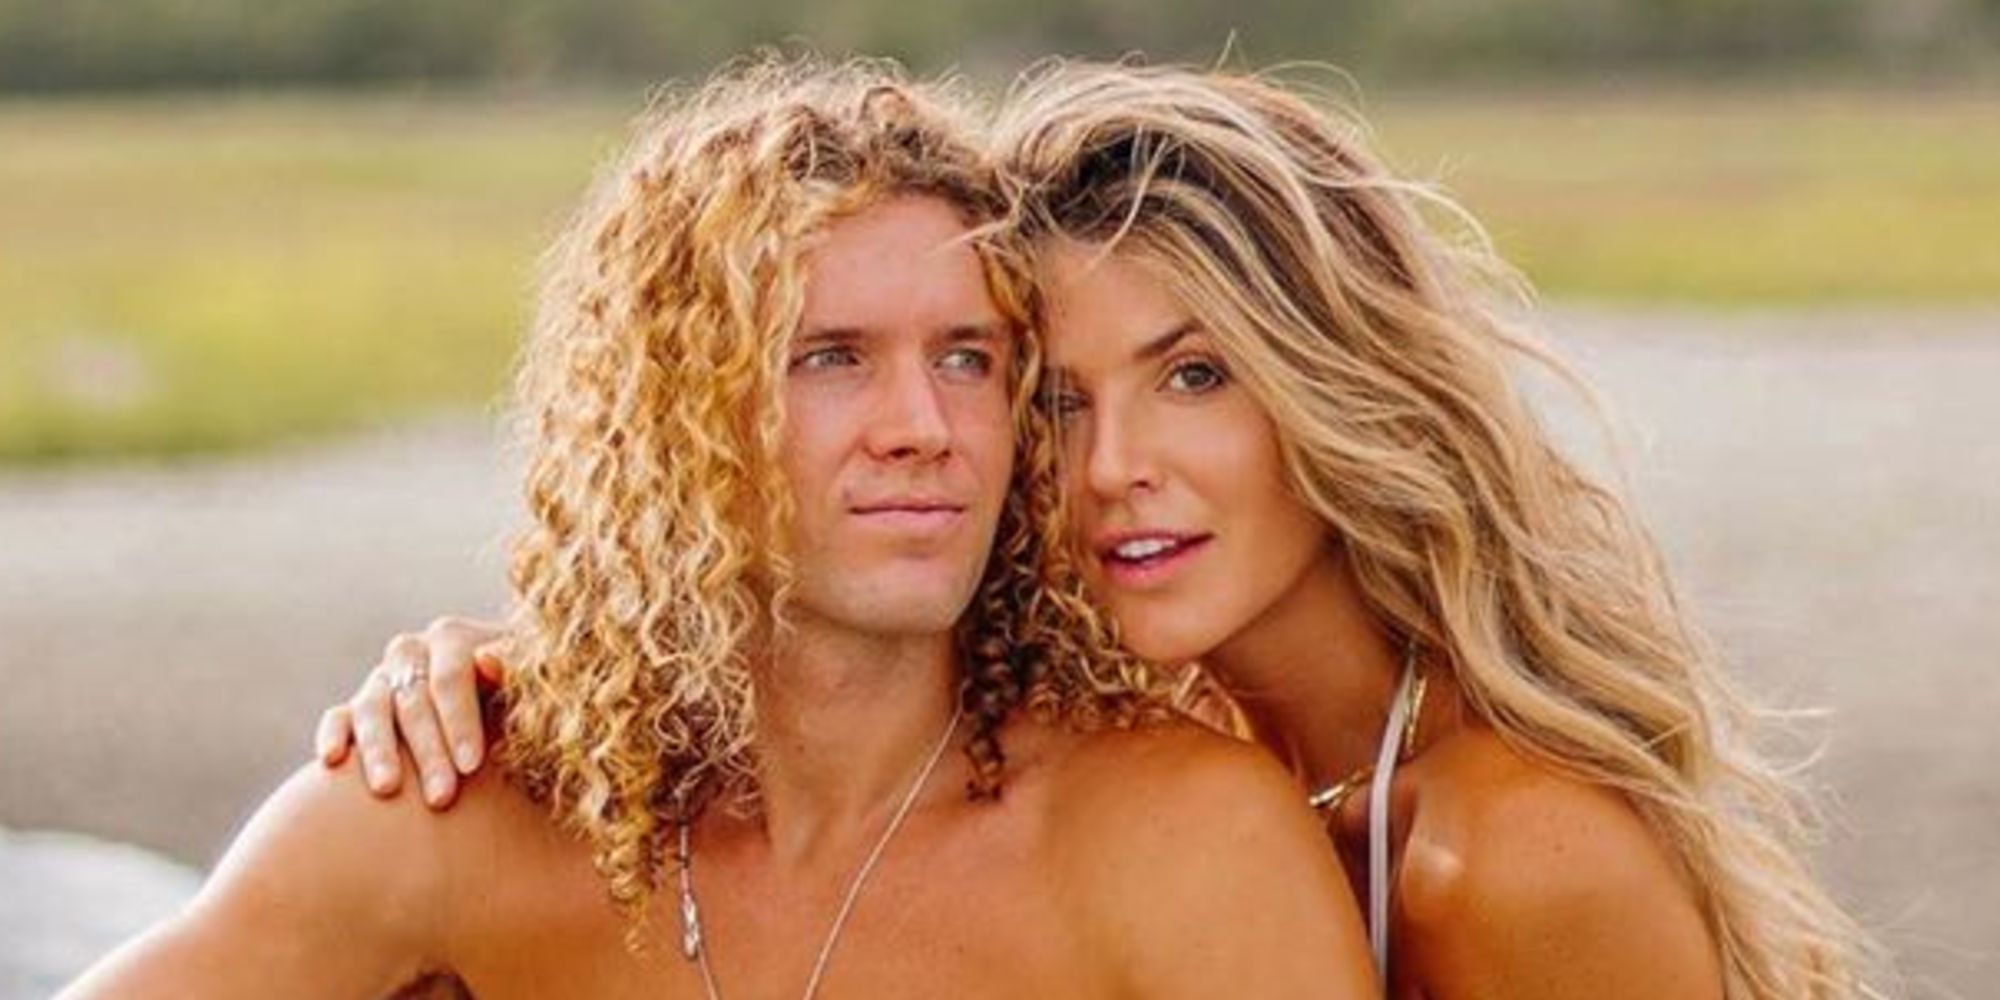 Tyler Crispen and Angela Rummans from Big Brother 20 put their heads together and smile for the camera